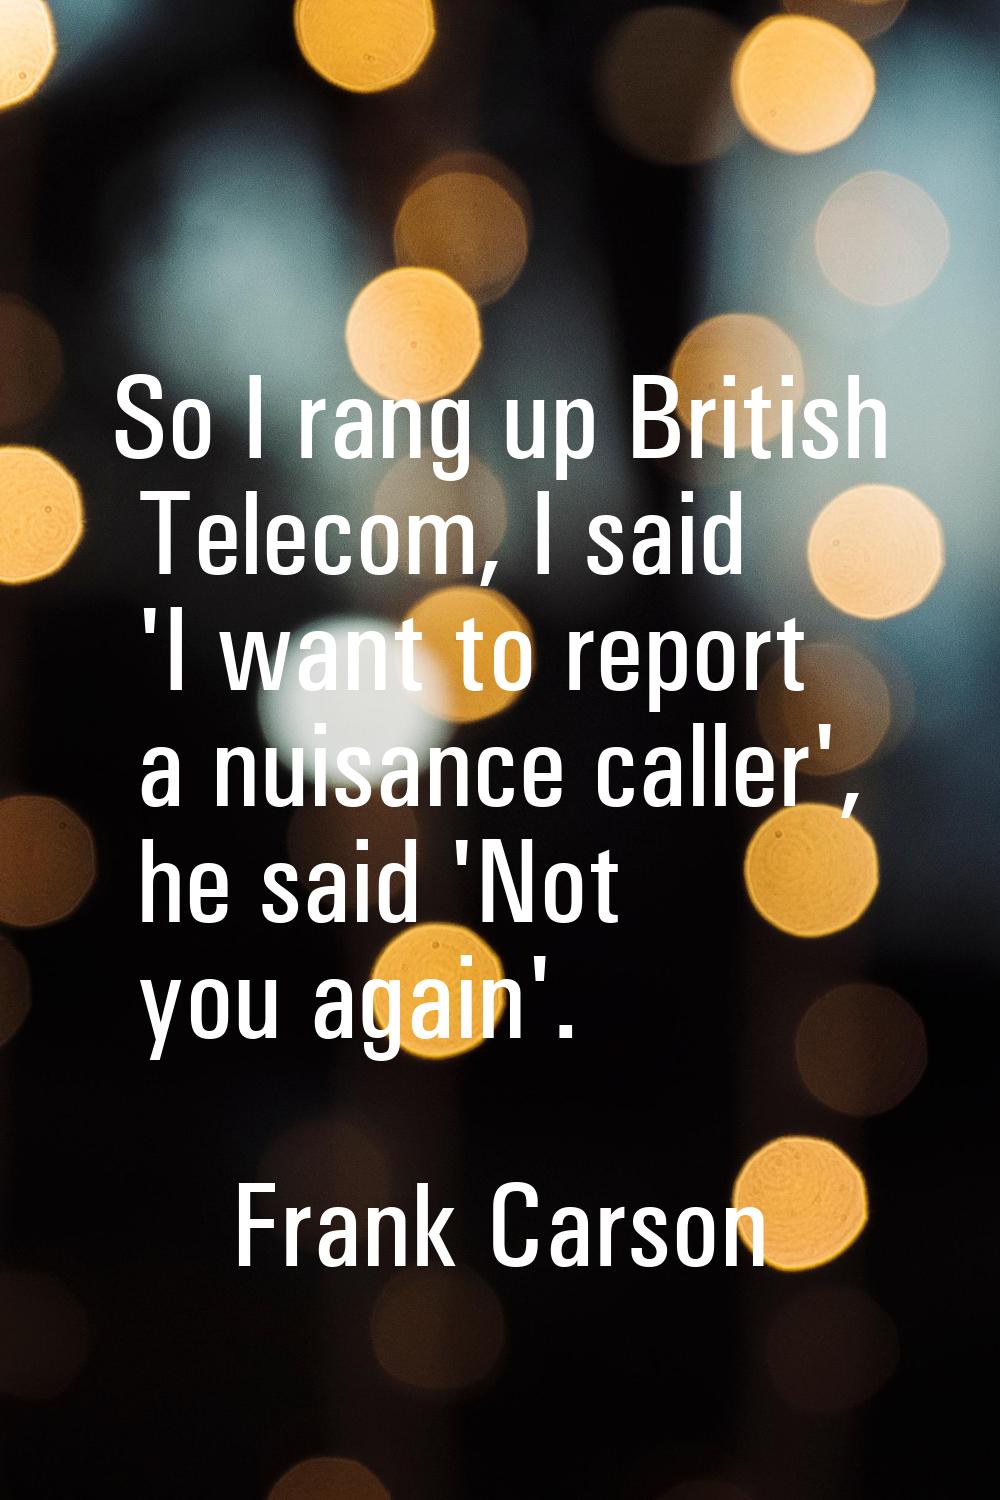 So I rang up British Telecom, I said 'I want to report a nuisance caller', he said 'Not you again'.